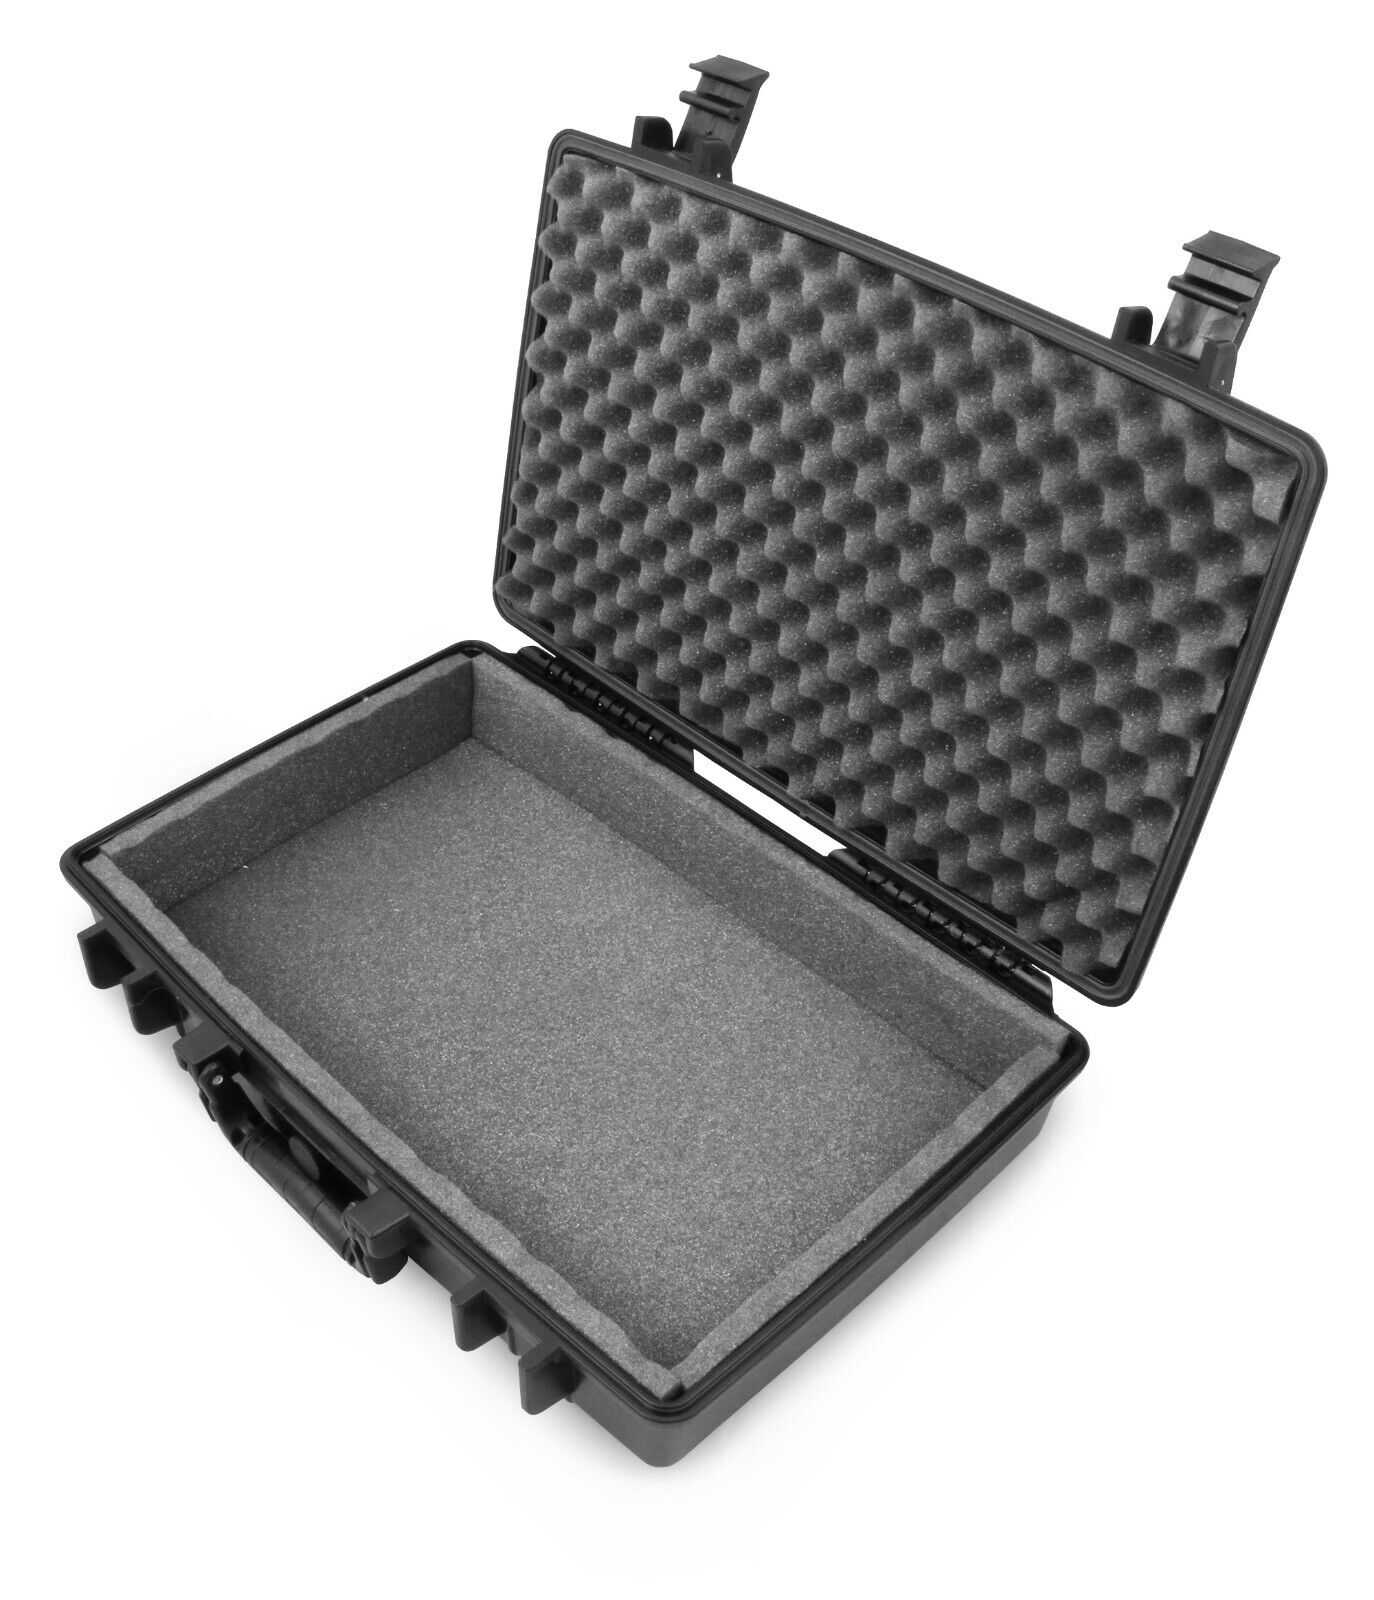 Waterproof Laptop Case for the HP Pavilion 15 Laptop , HP Pavilion X360 and More